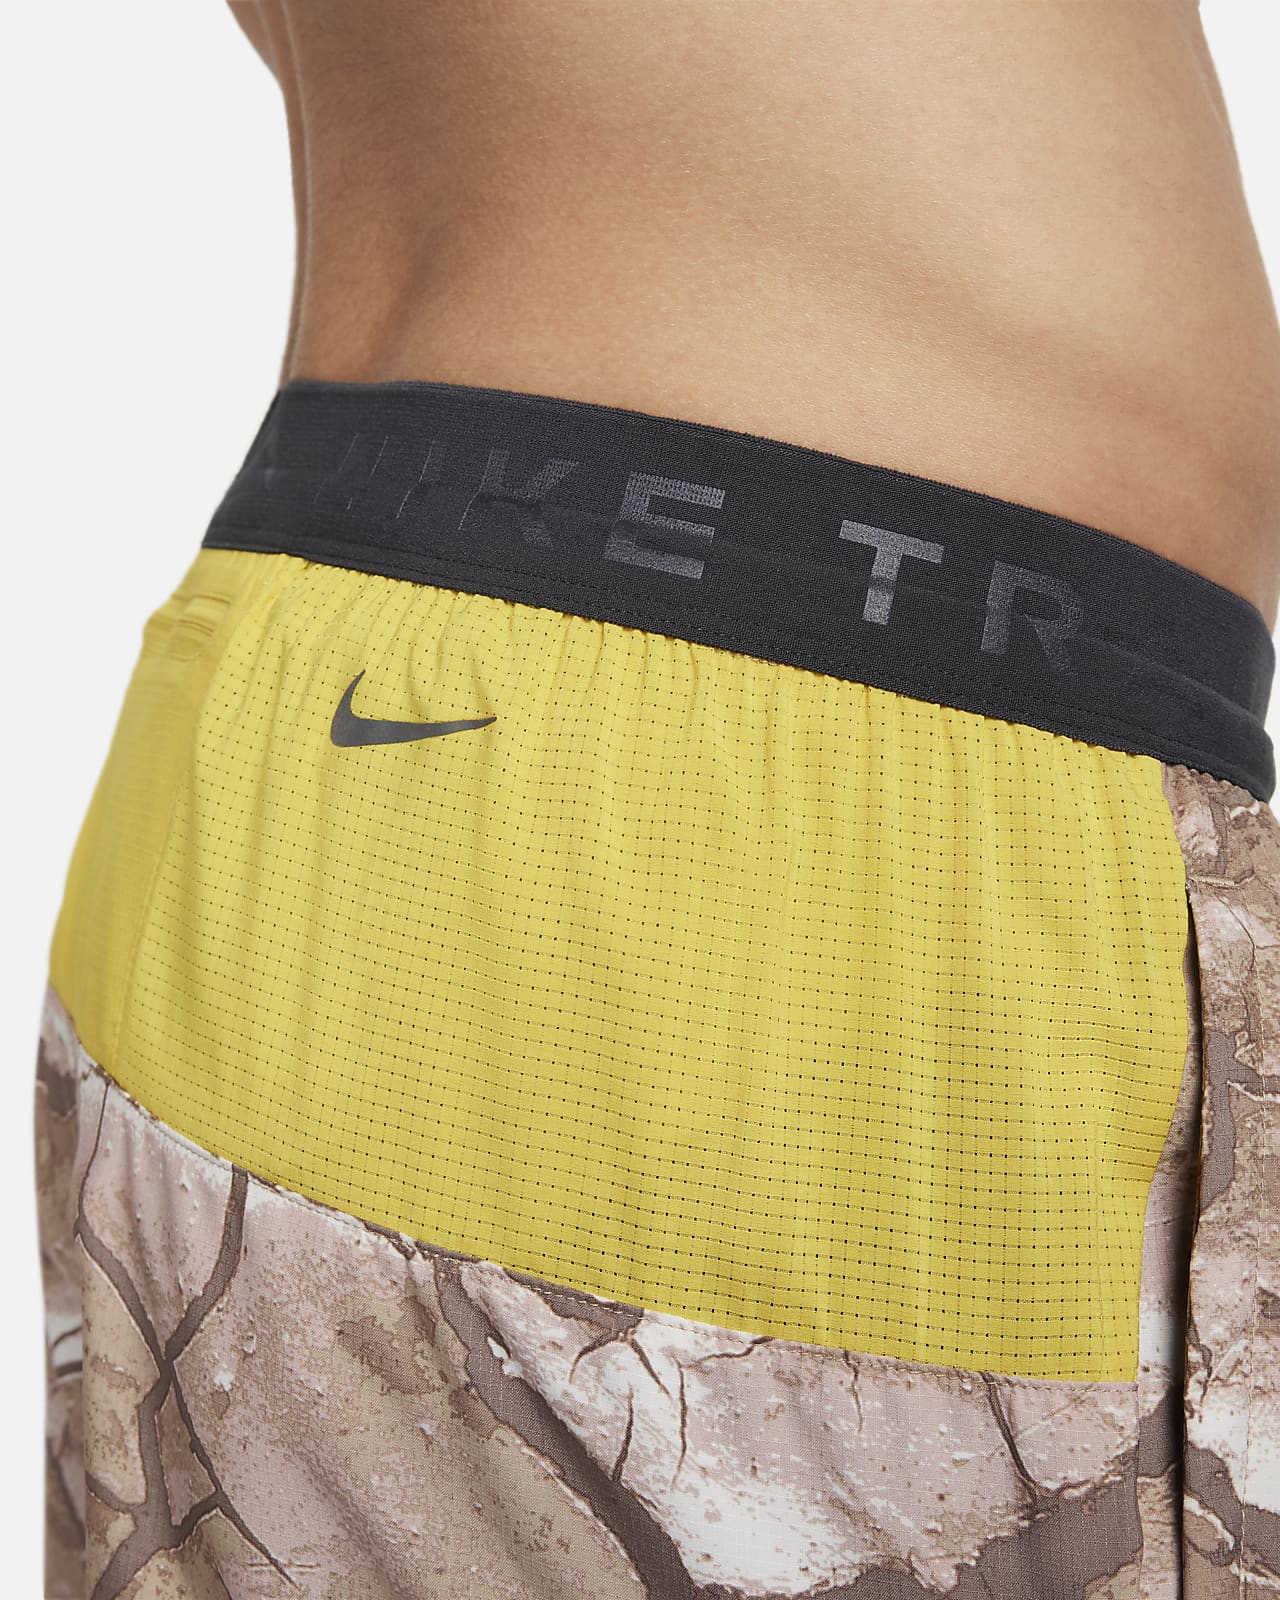 Nike Dri-FIT Stride Men's 18cm (approx.) Brief-Lined Printed Running Shorts